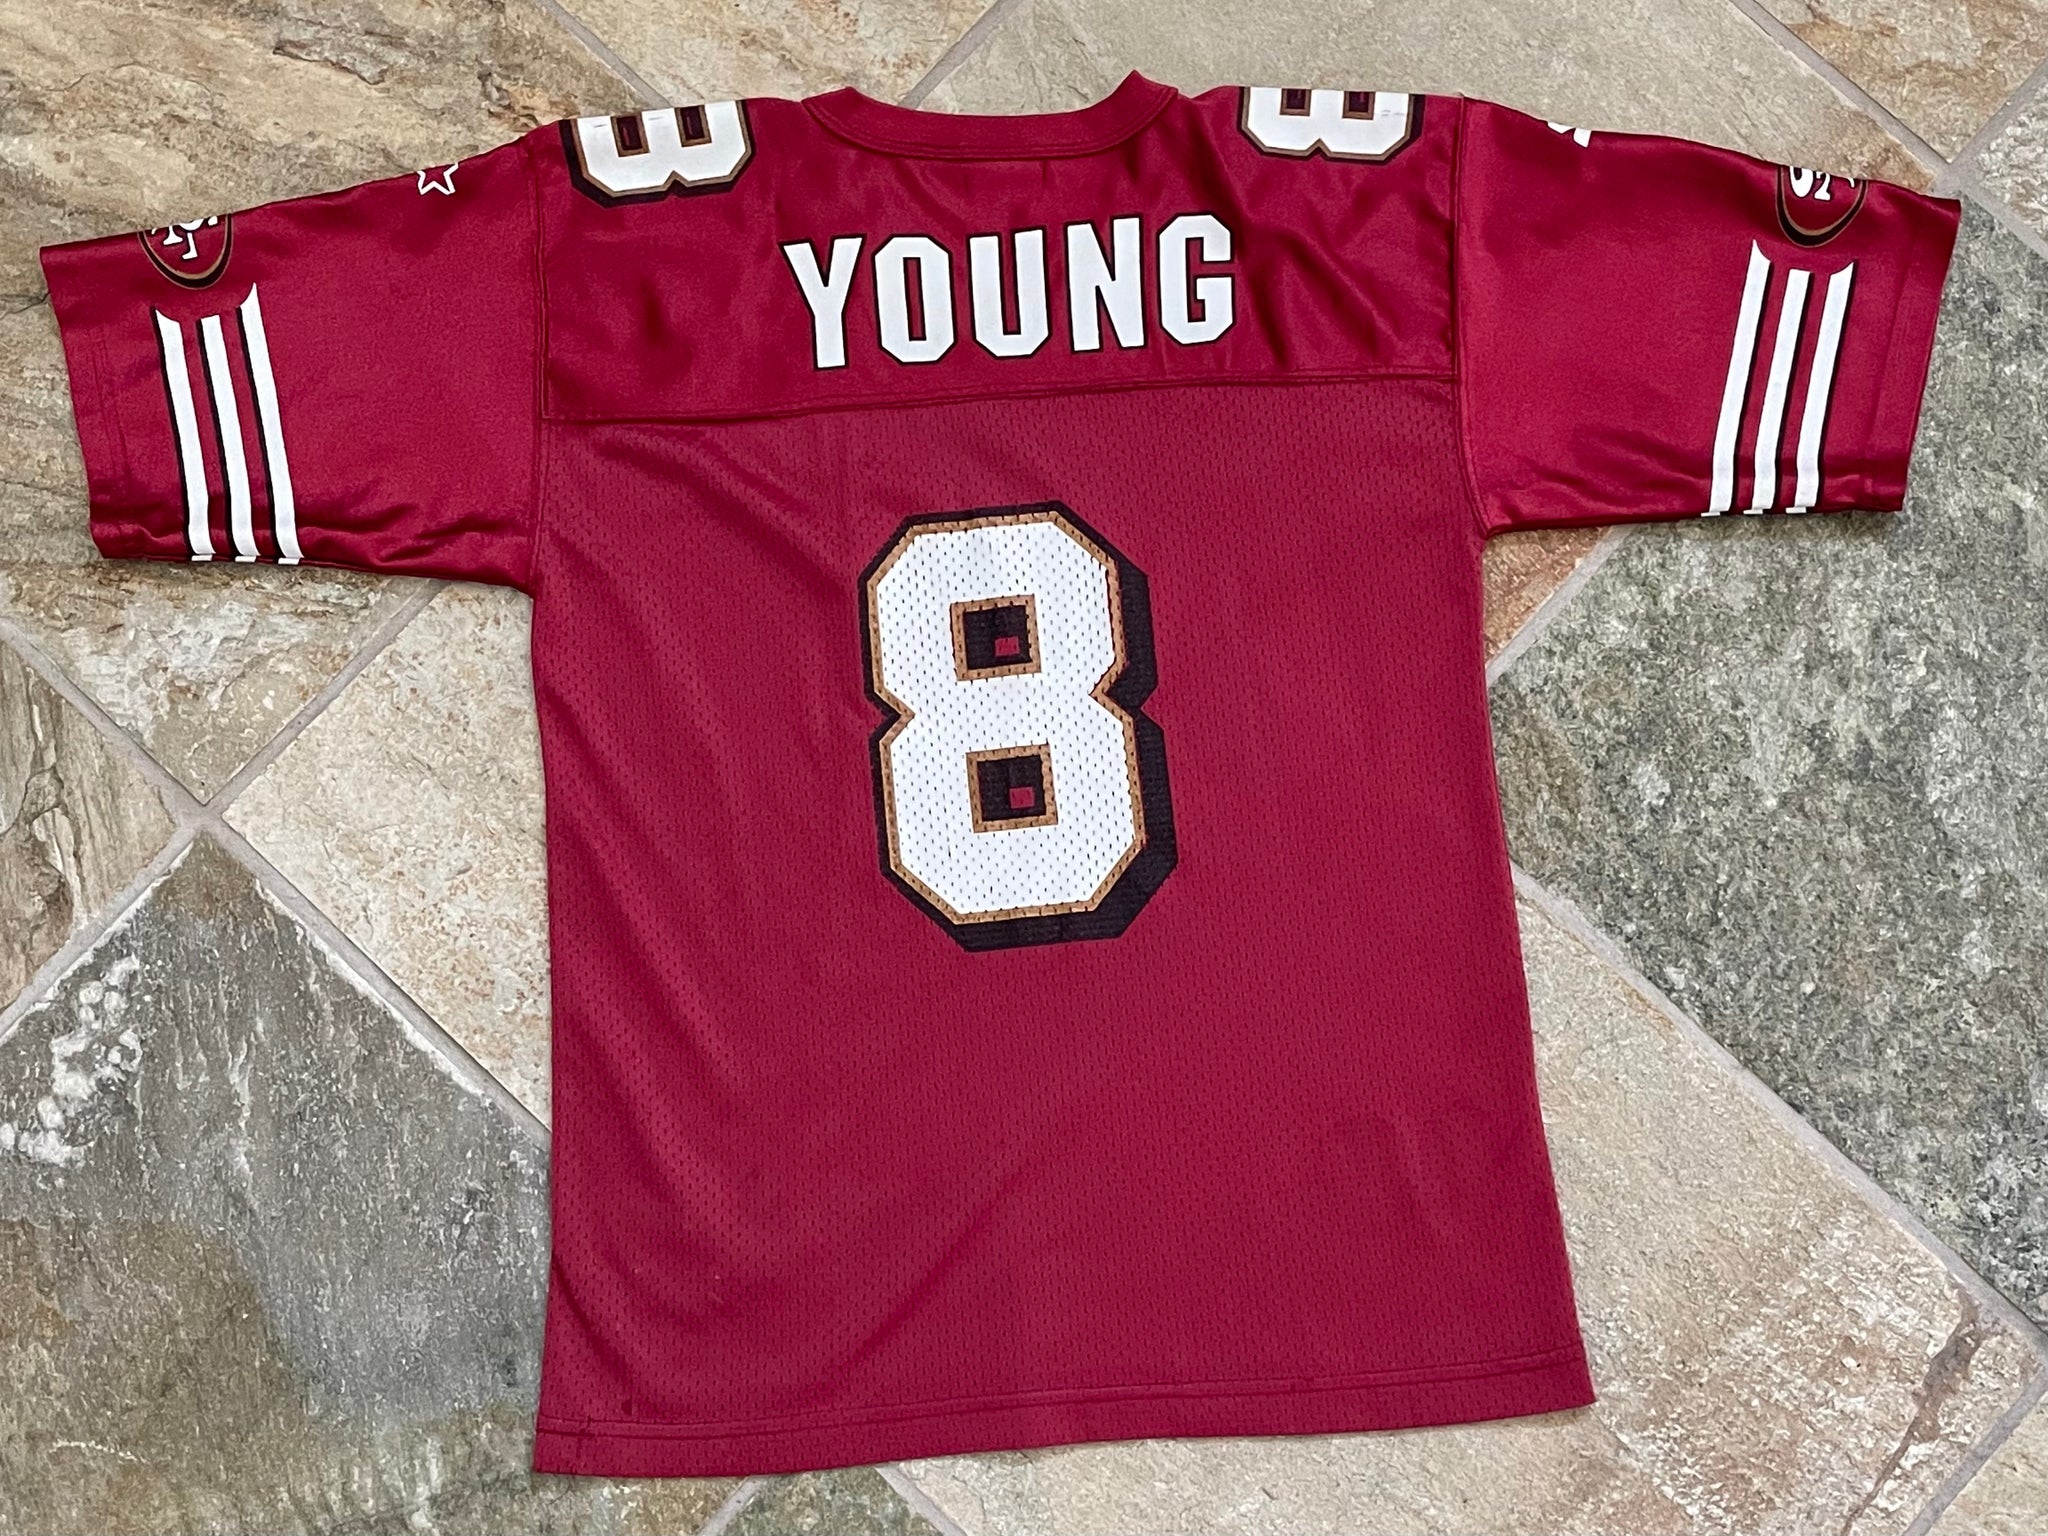 NEW WITH TAGS VINTAGE San Francisco 49ers STEVE YOUNG Football